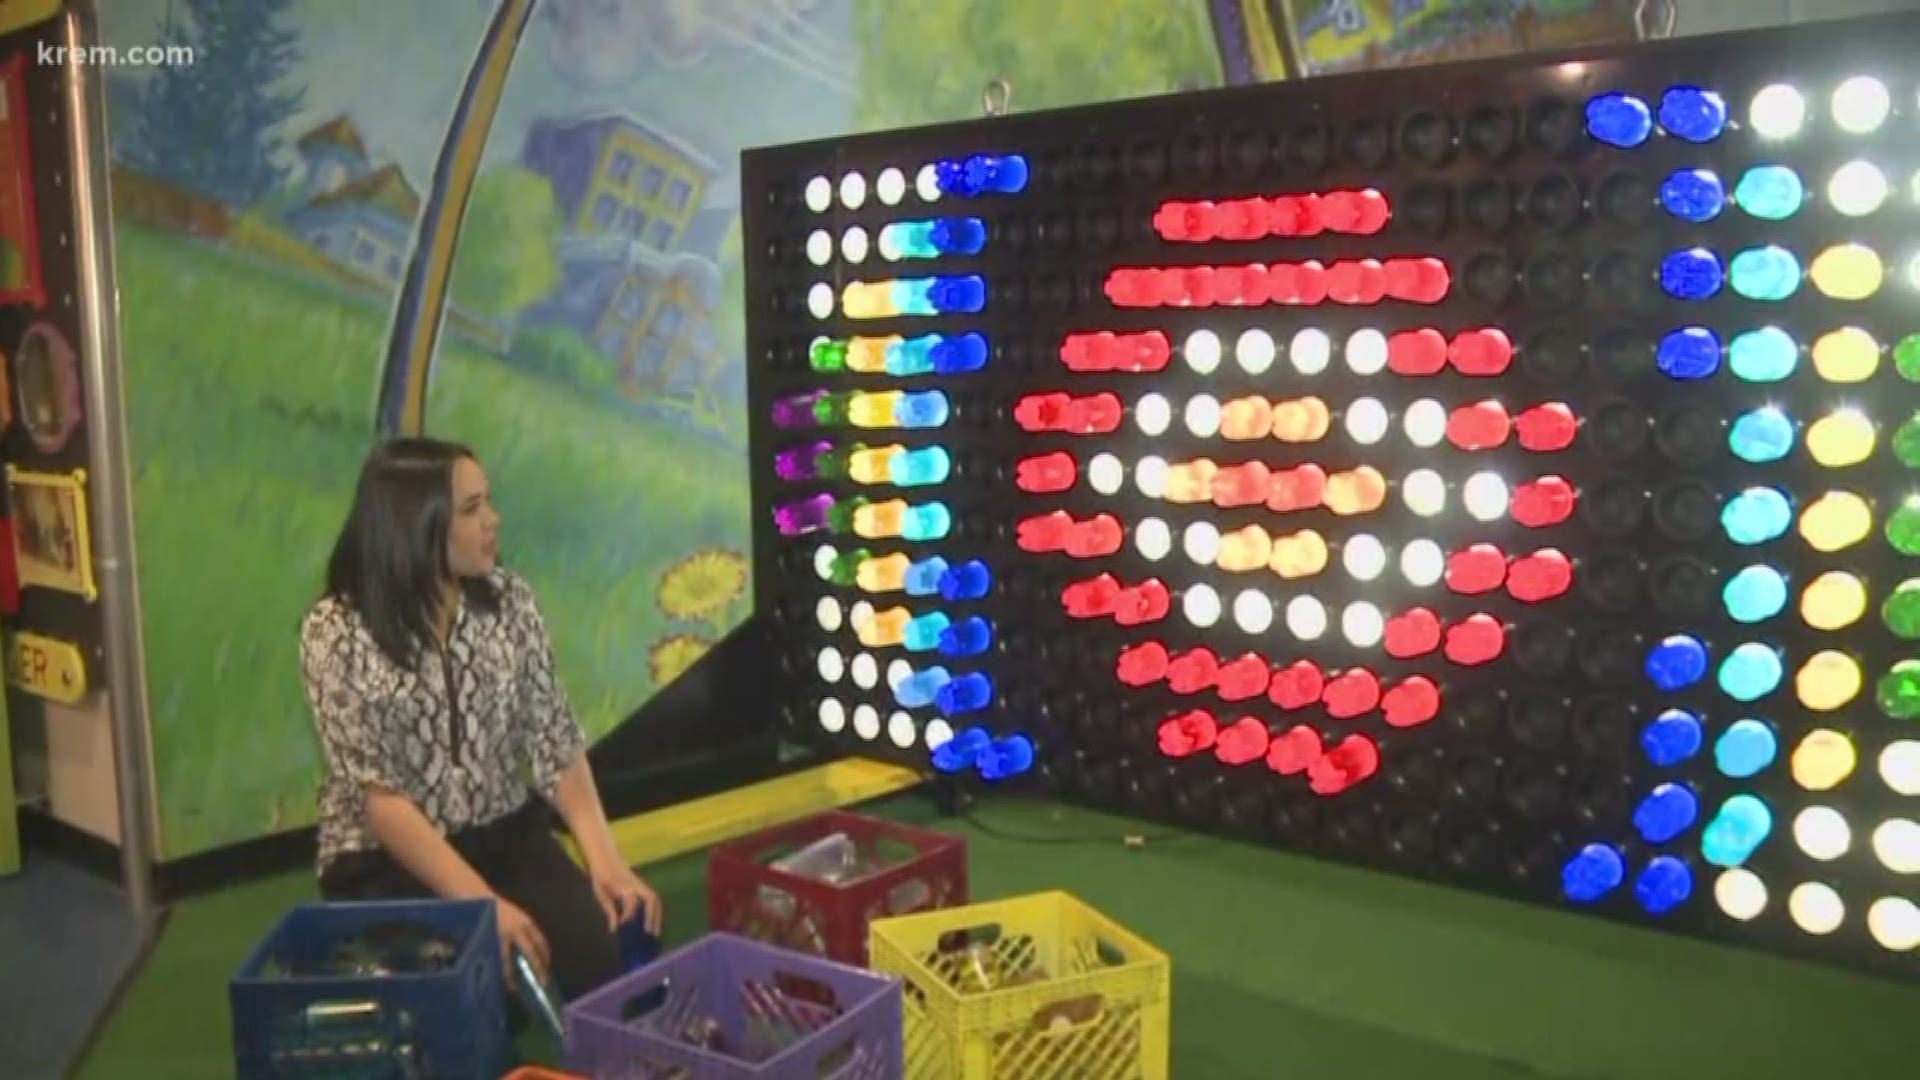 A team of nearly a dozen Avista electricians worked for about a month to a build a giant “Lite Brite” now featured at the Mobius Children’s Museum in downtown Spokane.